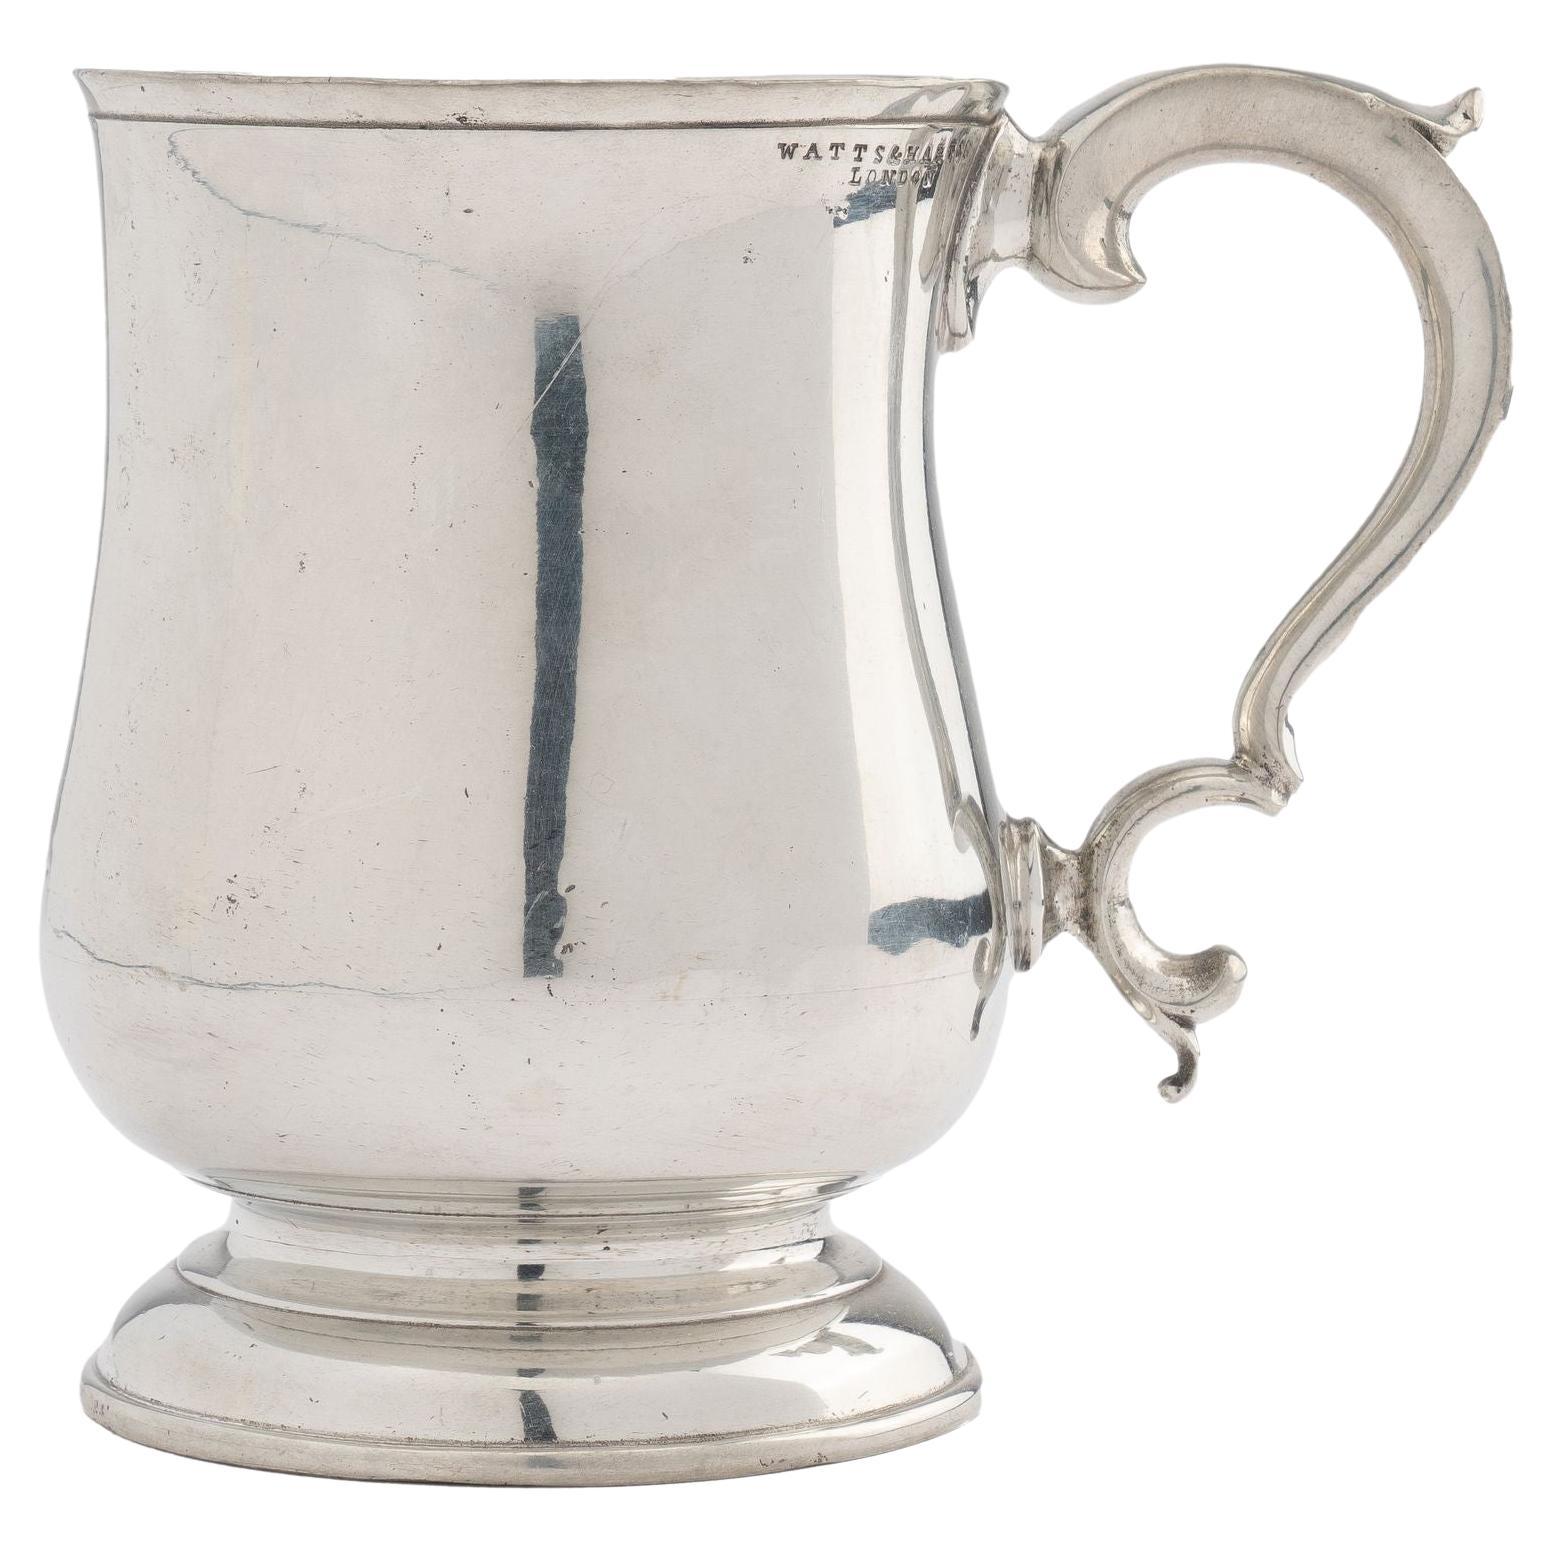 Watts & Harton Tulip Shaped Polished Pewter Mug with Applied Scroll Handle, 1830 For Sale